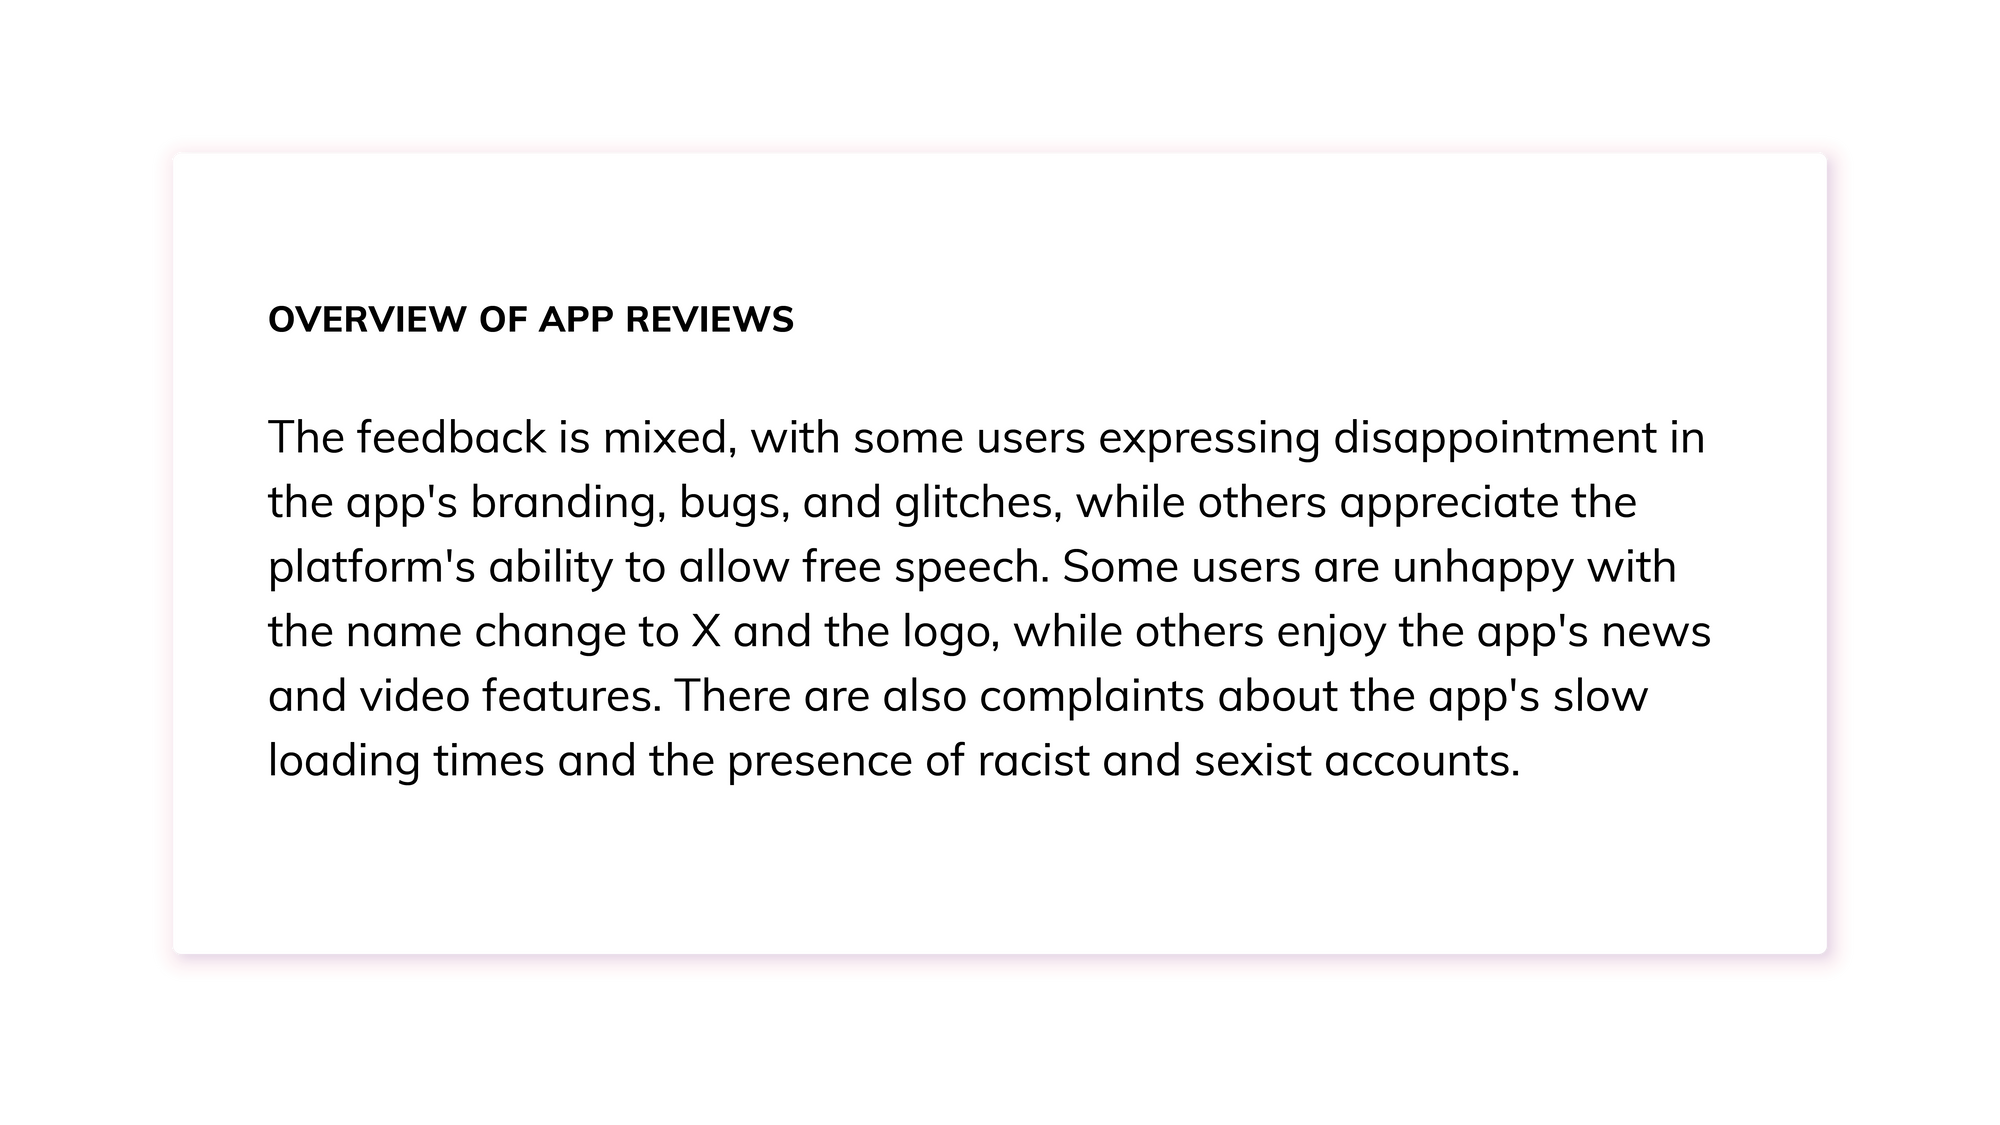 Summary from Thematic: The feedback is mixed, with some users expressing disappointment in the app's branding, bugs, and glitches, while others appreciate the platform's ability to allow free speech. Some users are unhappy with the name change to X and the logo, while others enjoy the app's news and video features. There are also complaints about the app's slow loading times and the presence of racist and sexist accounts.